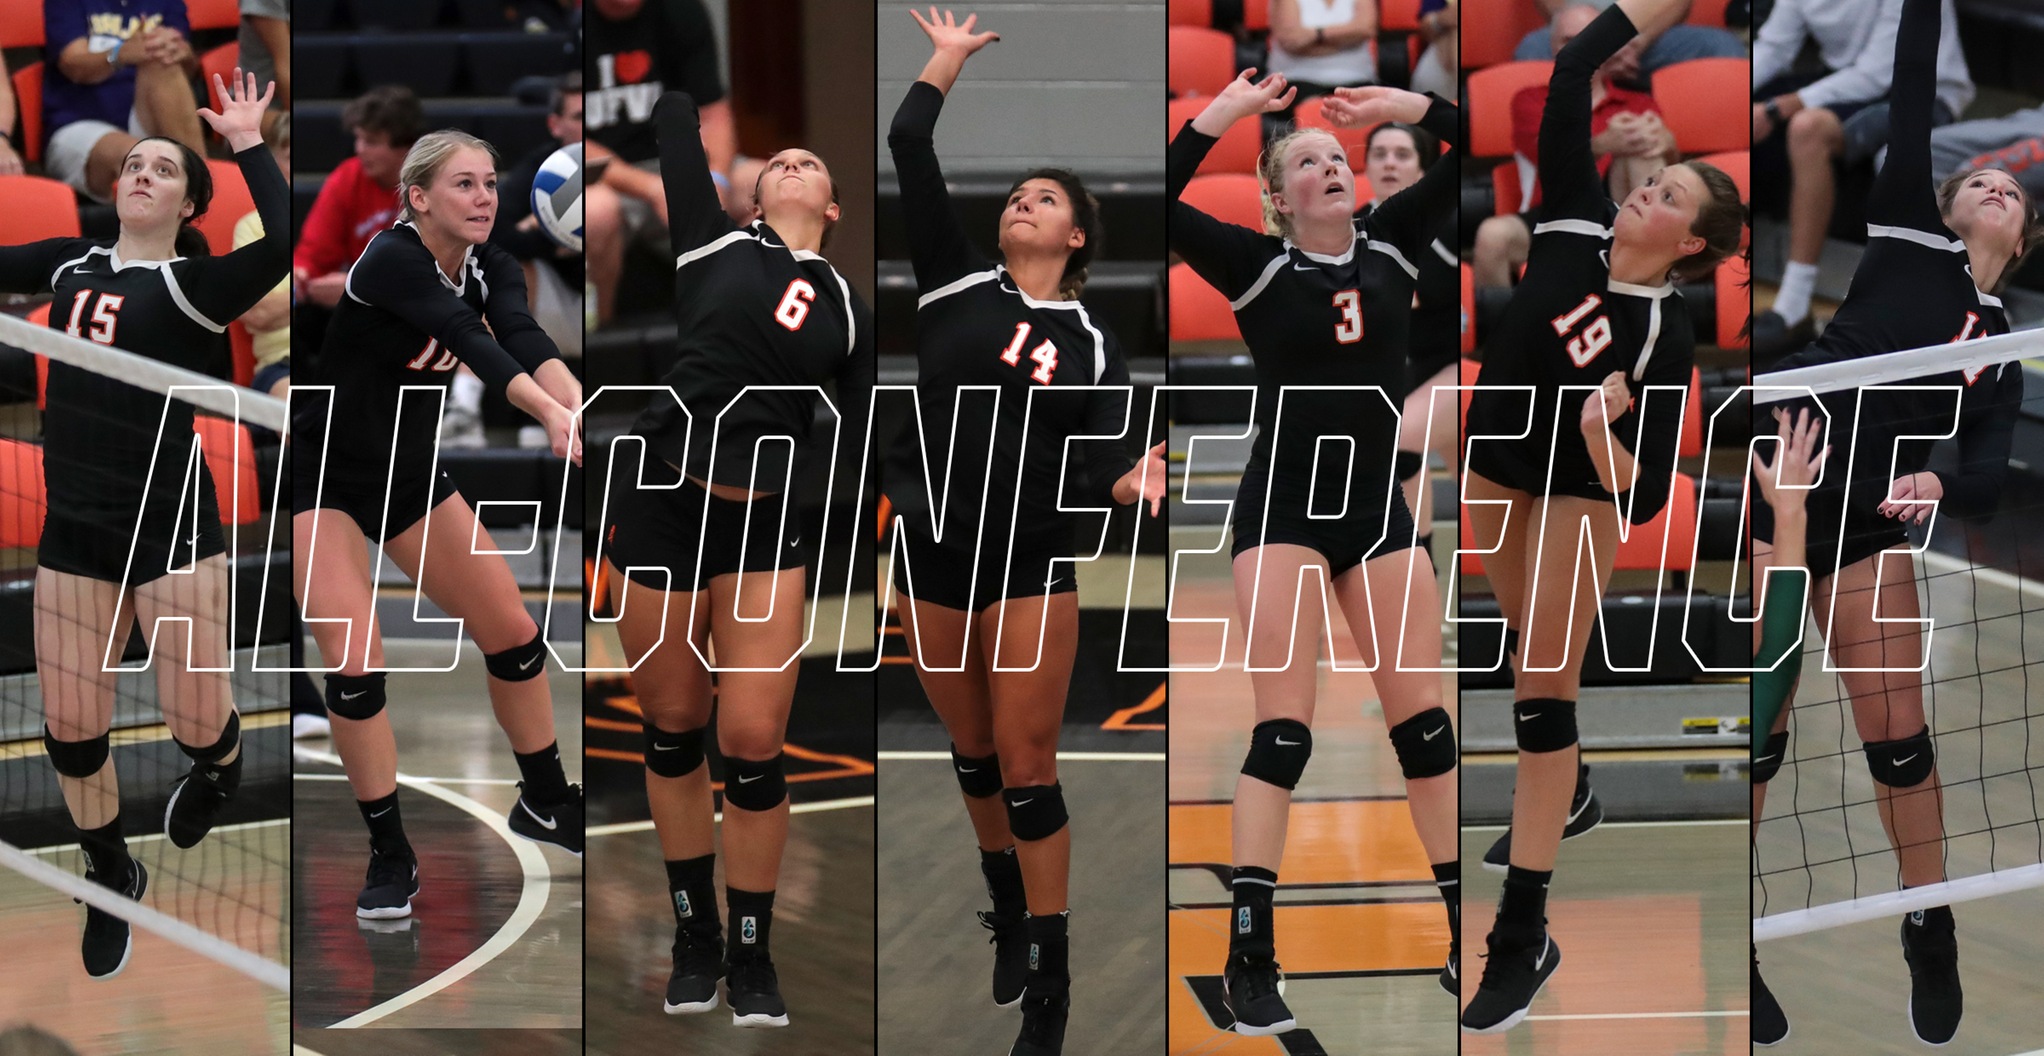 7 Oilers Earn All-Conference Accolades